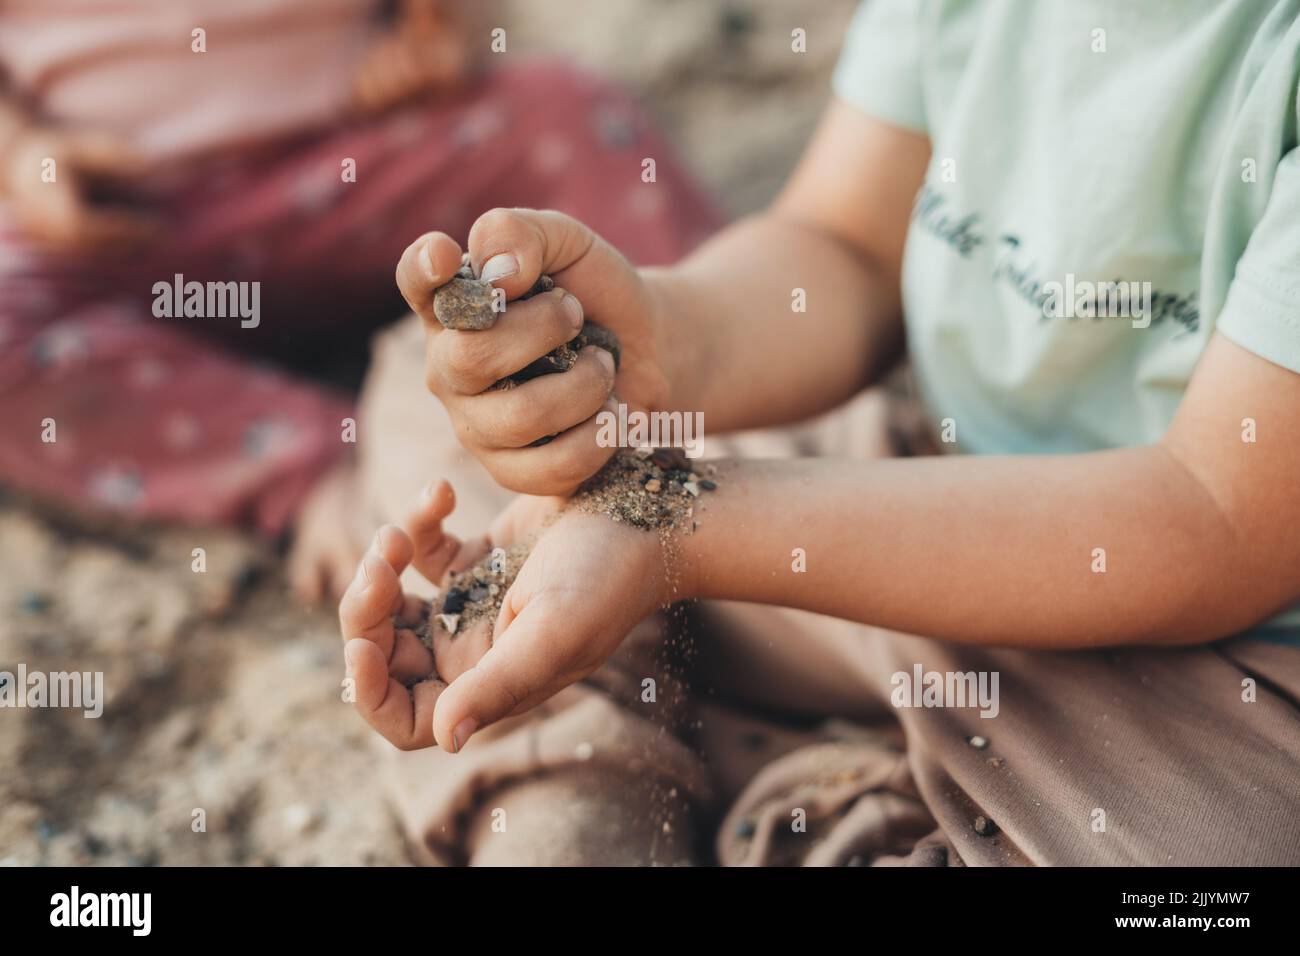 A boy's hands pouring sand from one to another. Child in happy mood, a family. Stock Photo